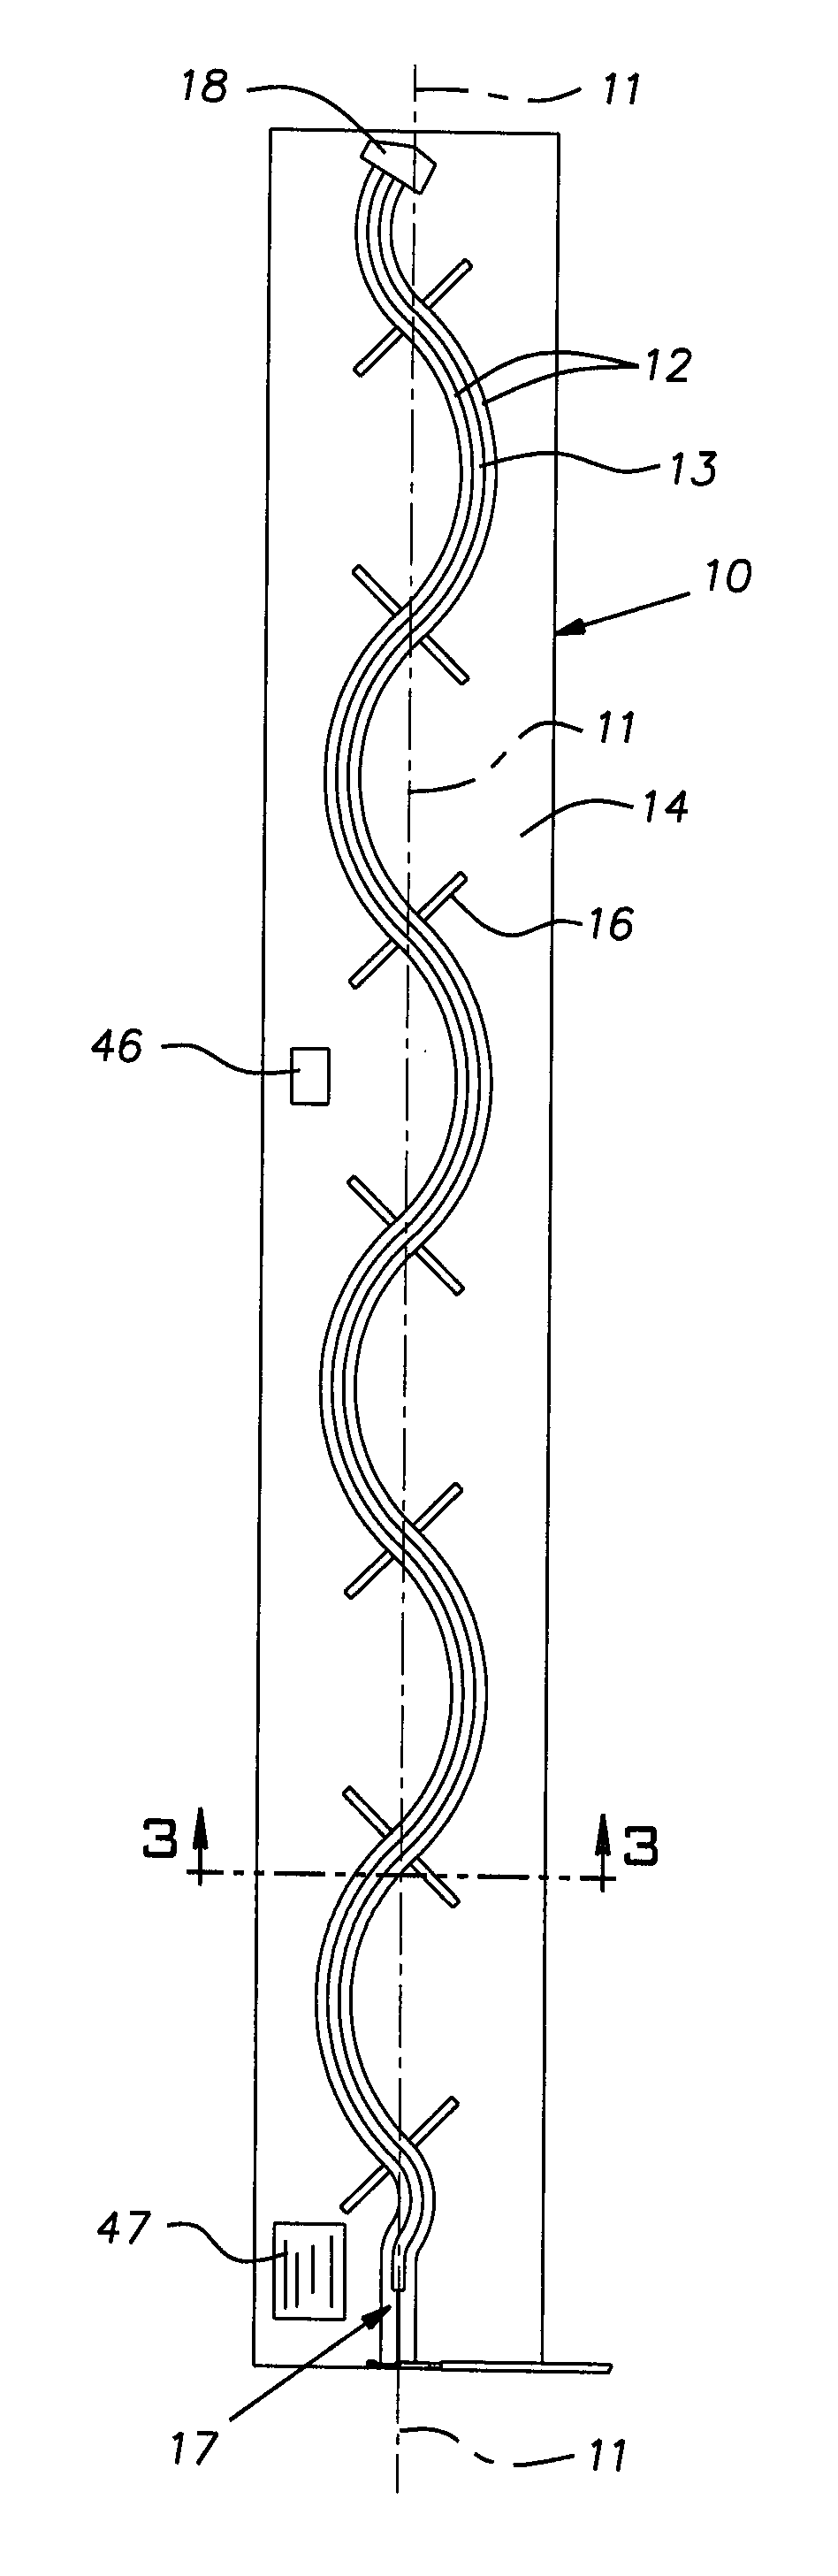 Elongated twin feed line RFID antenna with distributed radiation perturbations